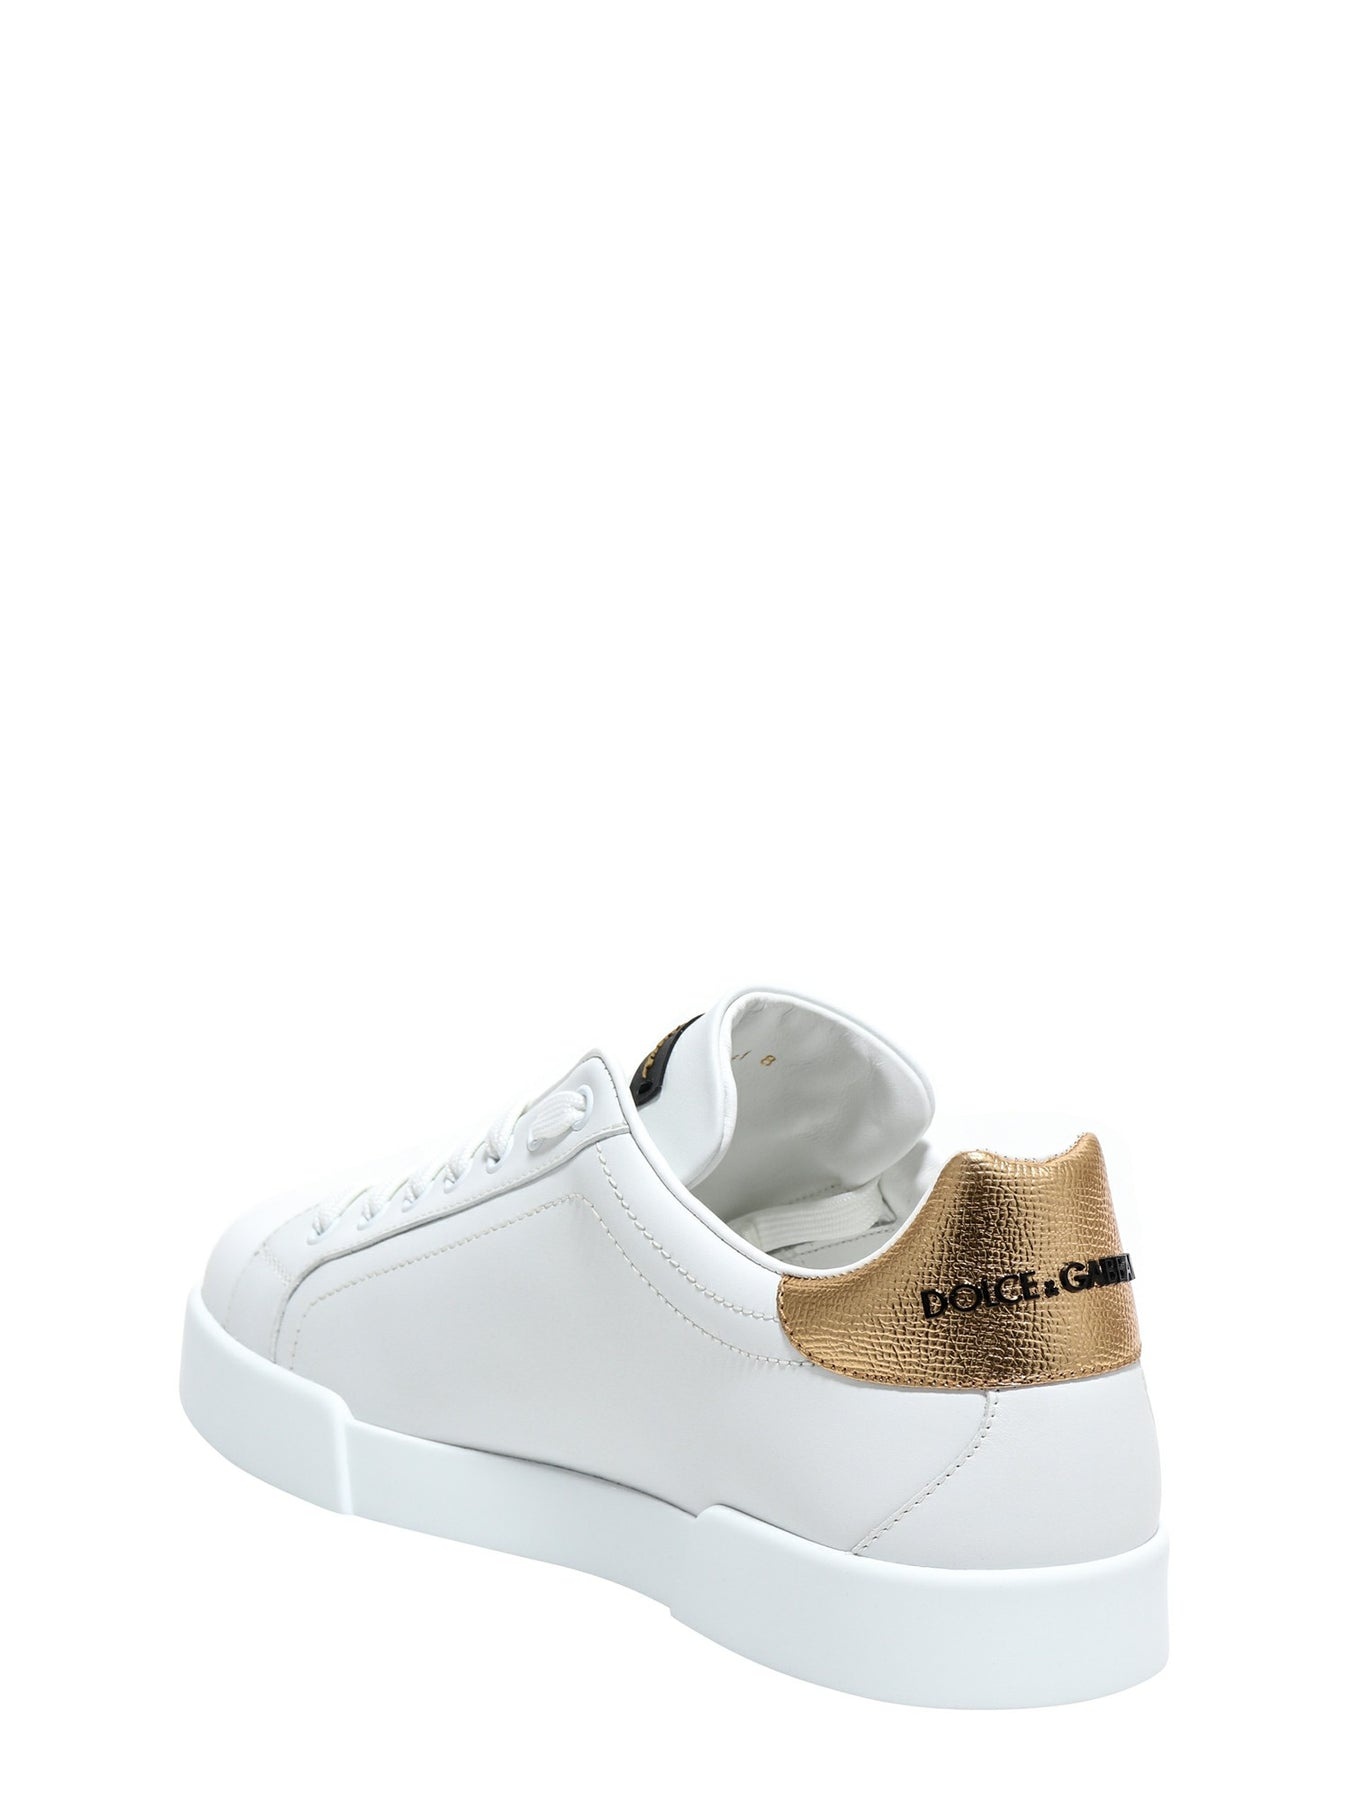 Portofino leather sneakers with logoed crown patch - 3